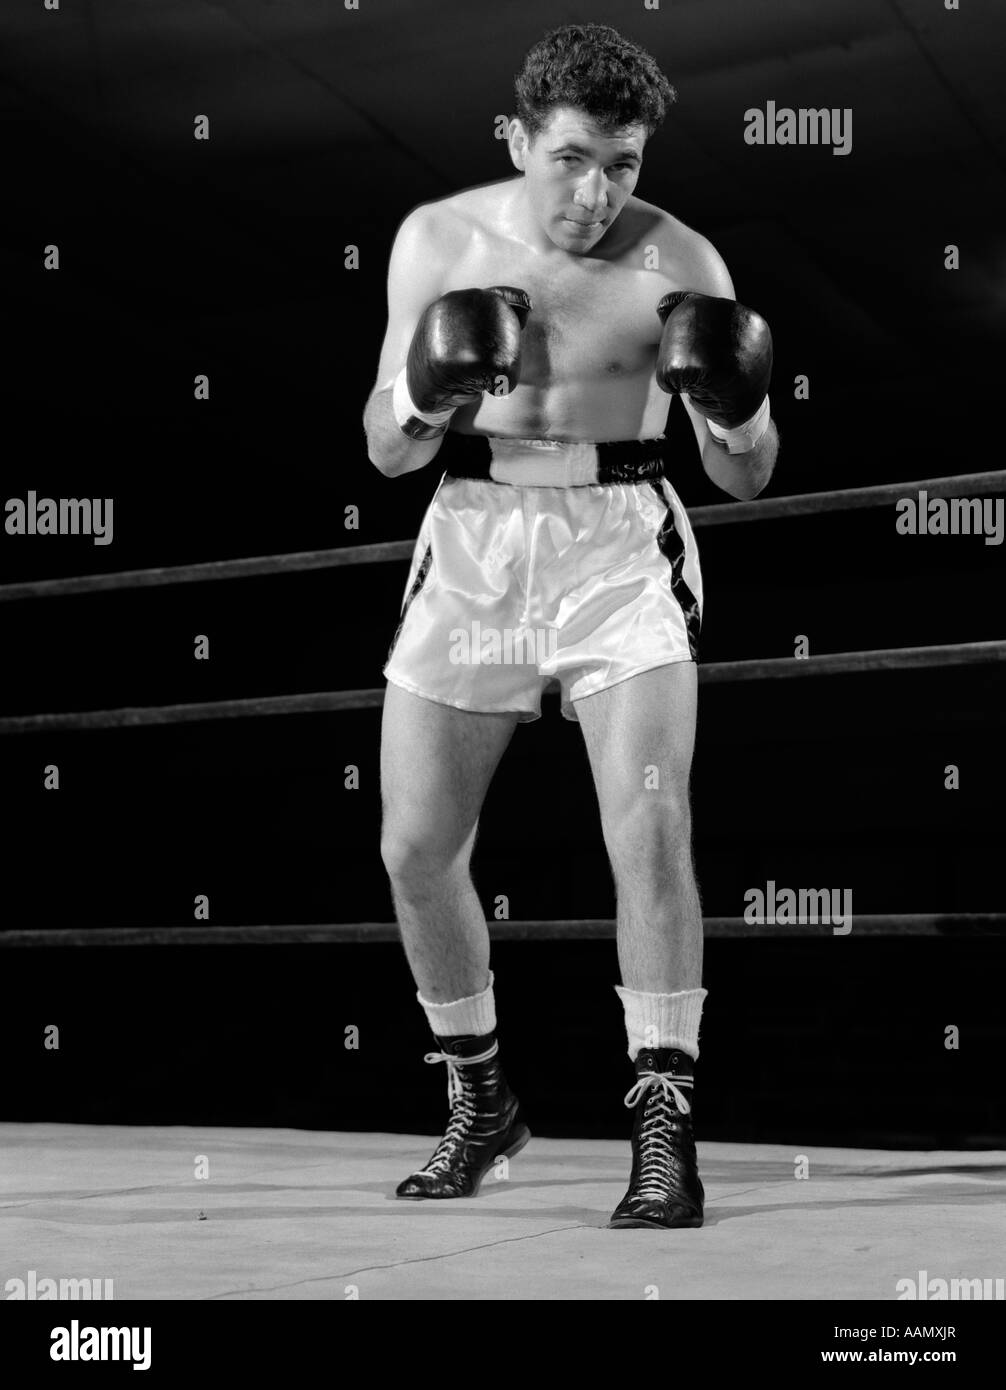 1950s FULL FIGURE BOXER IN RING FACING CAMERA WITH FISTS IN BOXING GLOVES  Stock Photo - Alamy